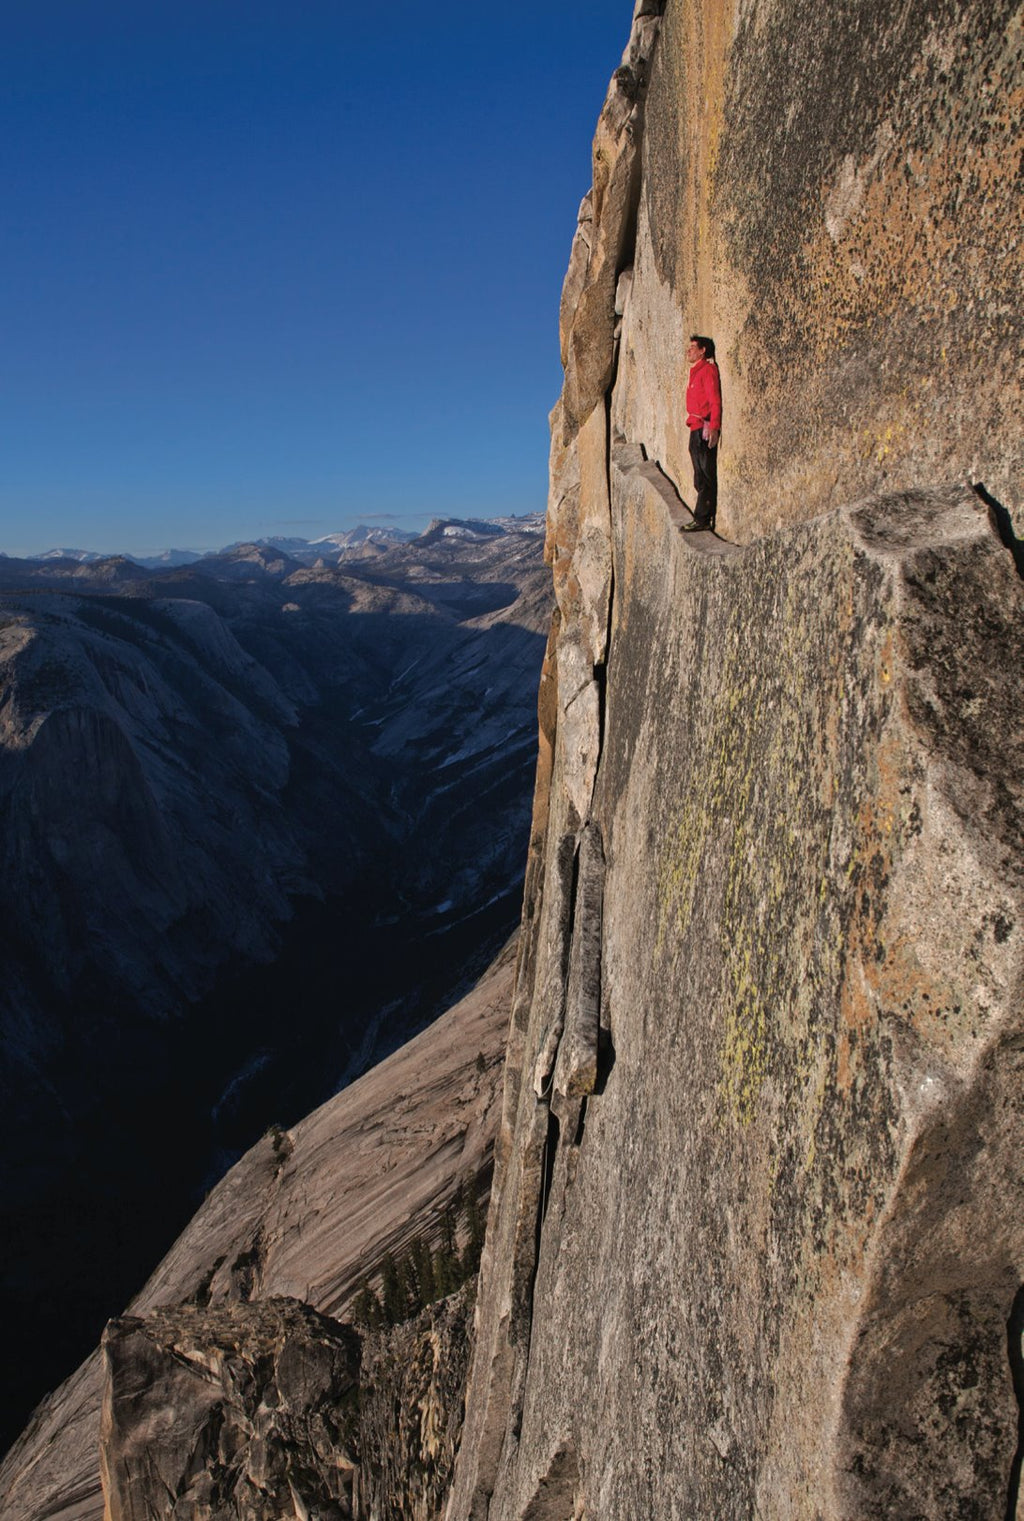 Alex Honnold, taking it all in on Thank God Ledge, Regular NW Face, Half Dome, 2011 <b>CONTEMPORARY ART</b> Jimmy Chin 12x18 